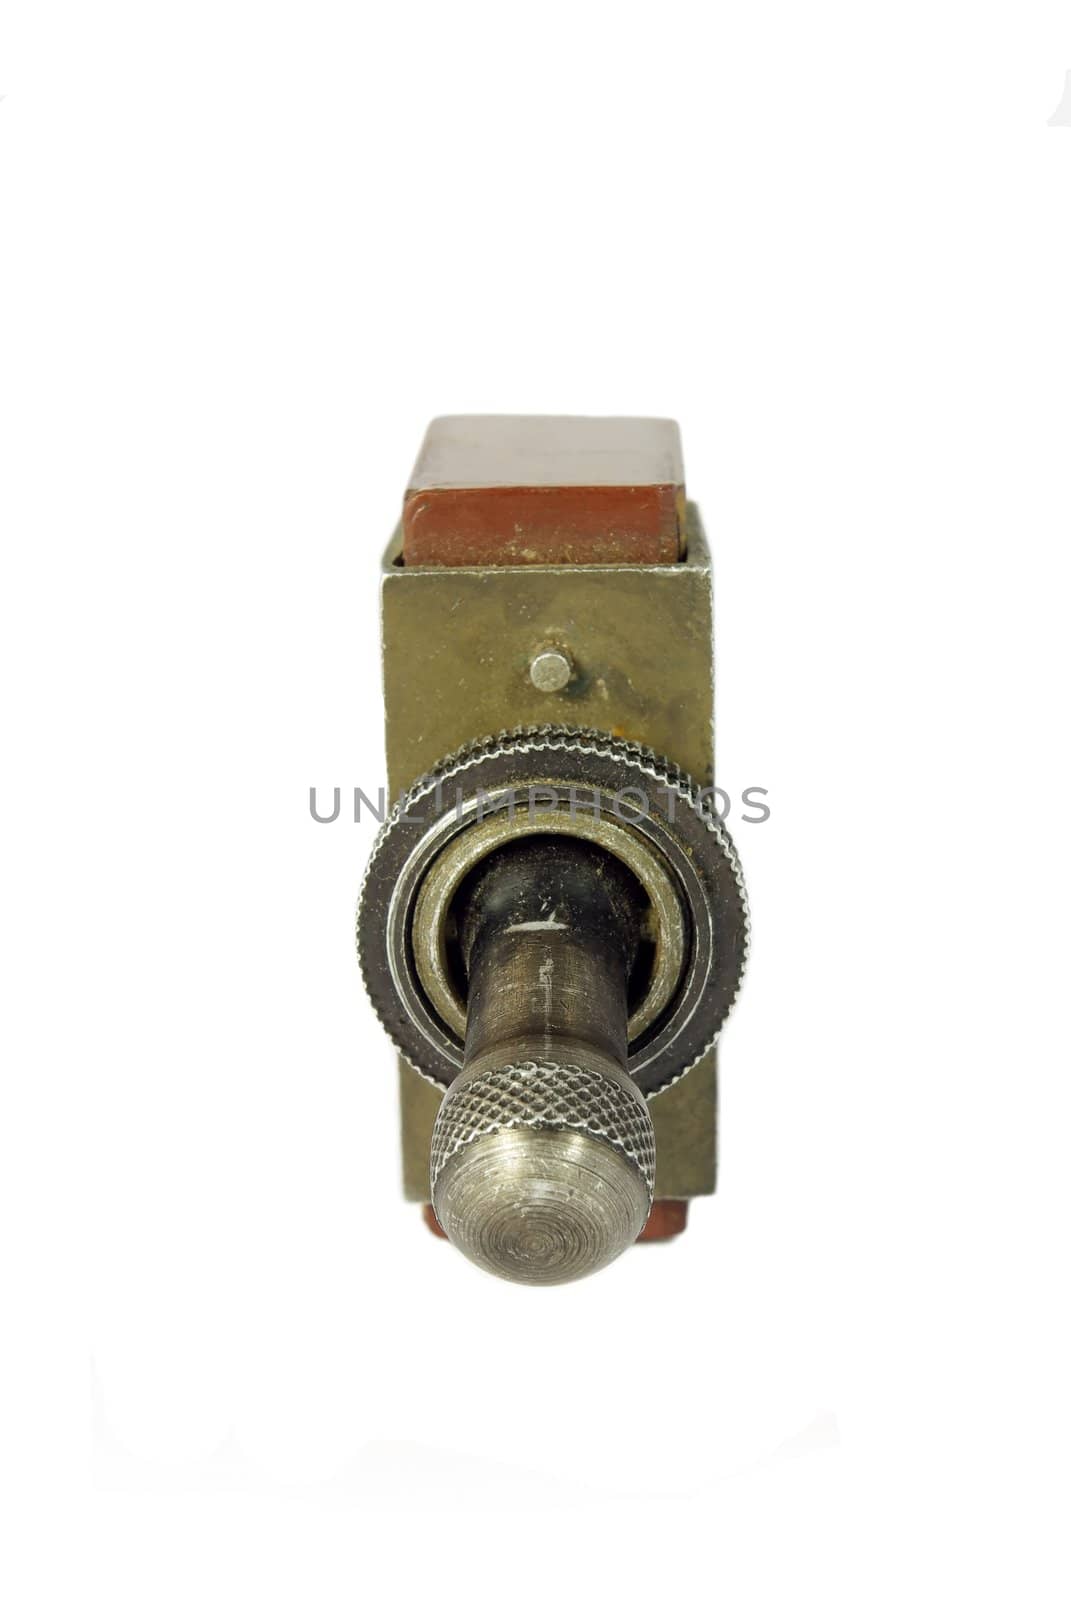 Old sovjet military toggle switch by Vitamin